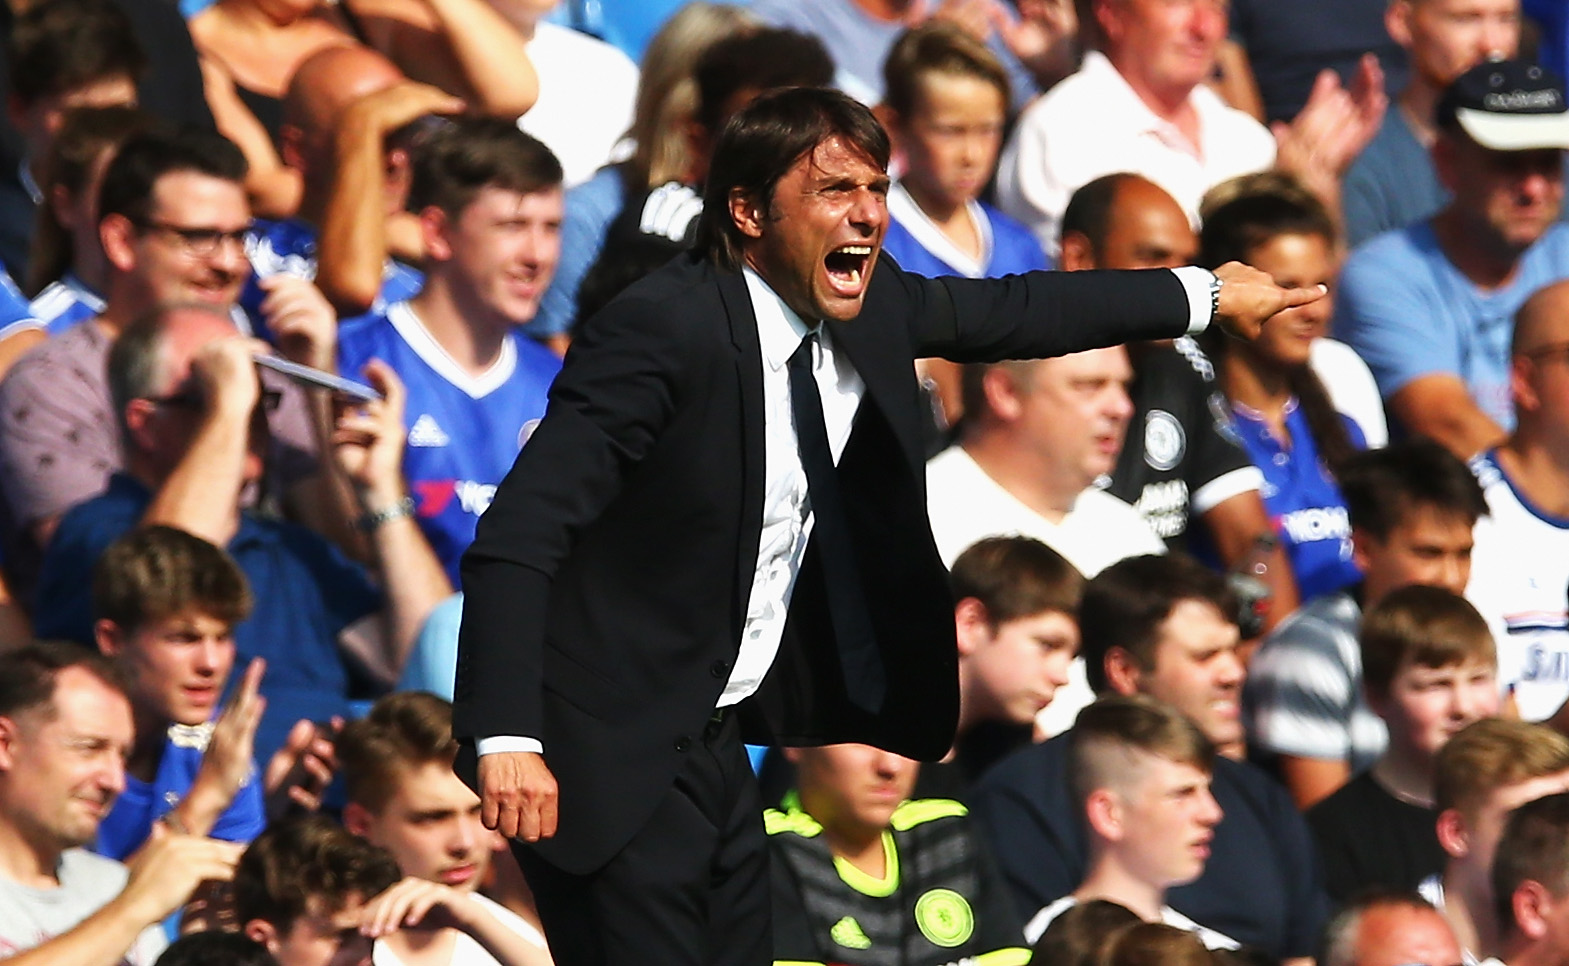 LONDON, ENGLAND - AUGUST 27:  Antonio Conte, Manager of Chelsea reacts during the Premier League match between Chelsea and Burnley at Stamford Bridge on August 27, 2016 in London, England.  (Photo by Steve Bardens/Getty Images)